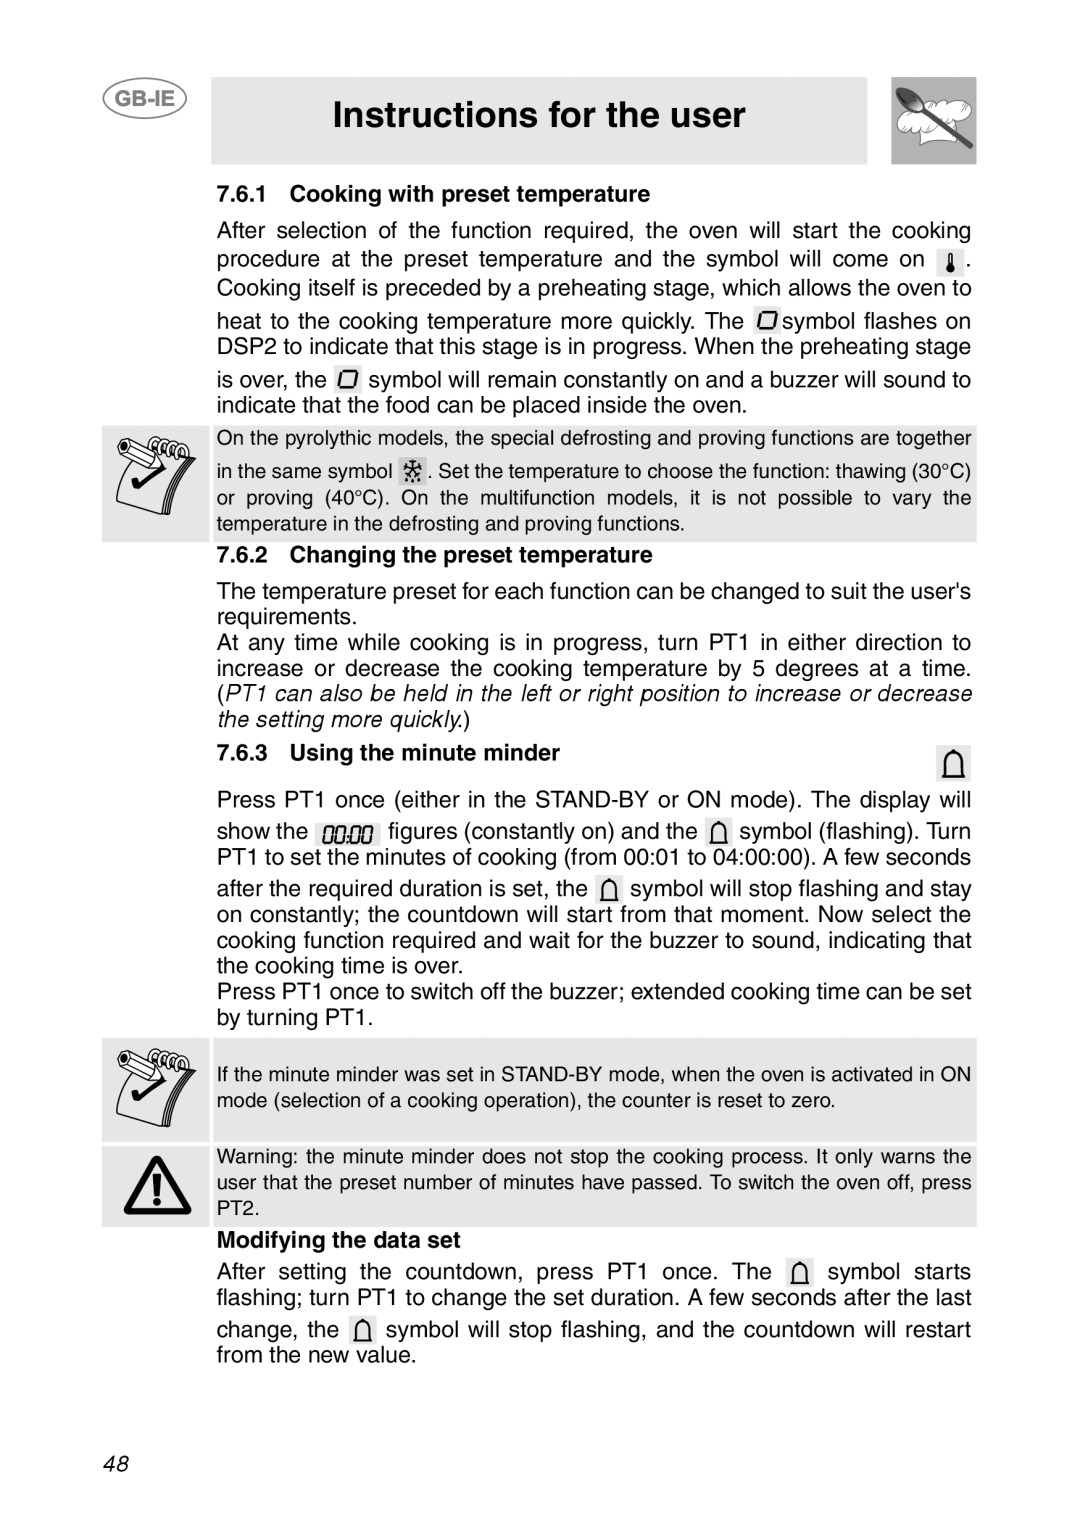 Smeg SCP111EB2, SCP111-2 manual Instructions for the user, Cooking with preset temperature, Changing the preset temperature 